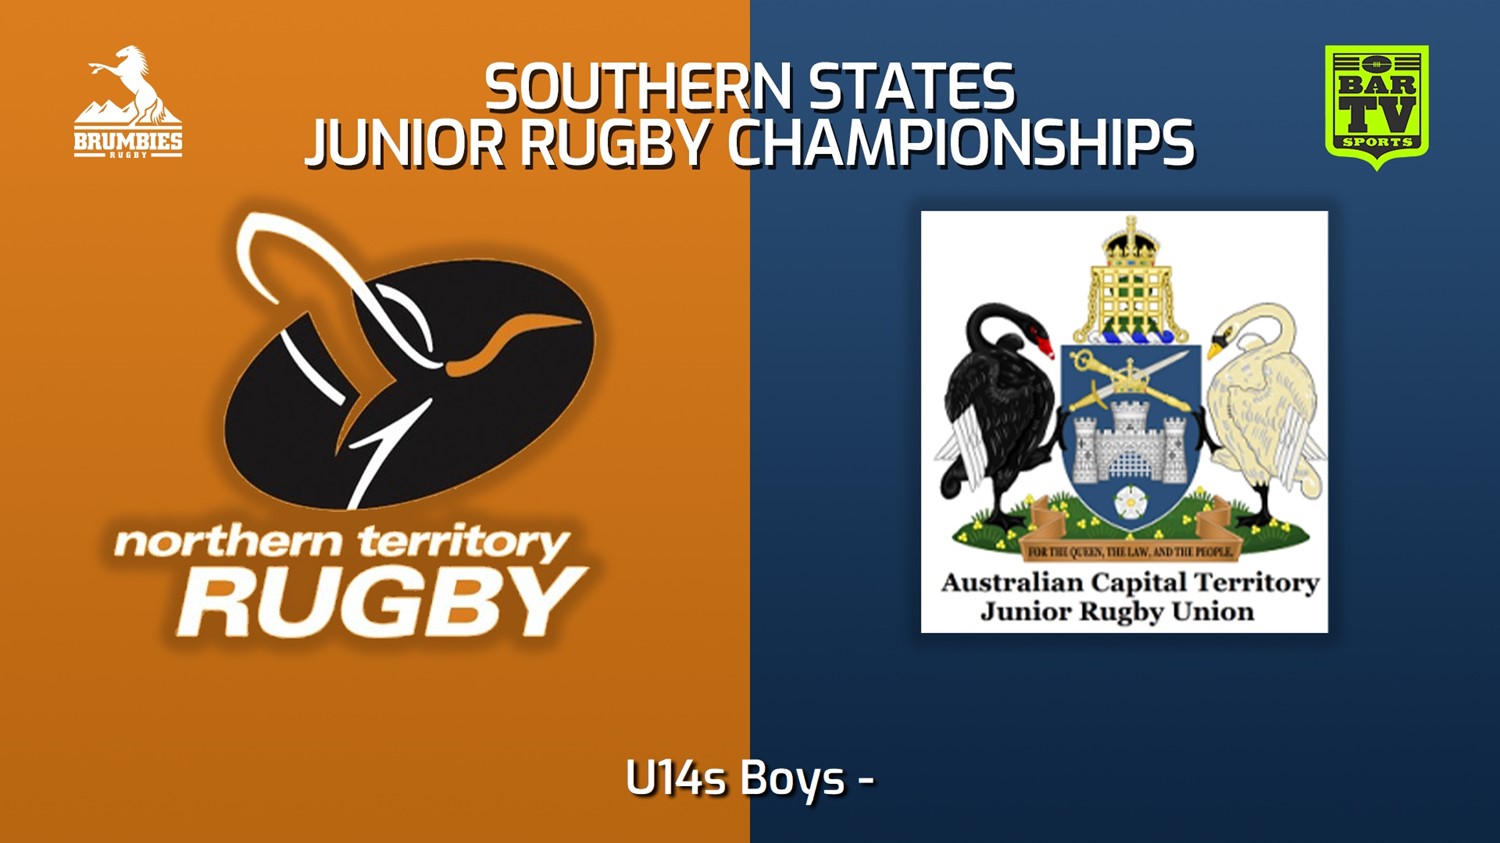 230711-Southern States Junior Rugby Championships U14s Boys - Northern Territory Rugby v ACTJRU Slate Image